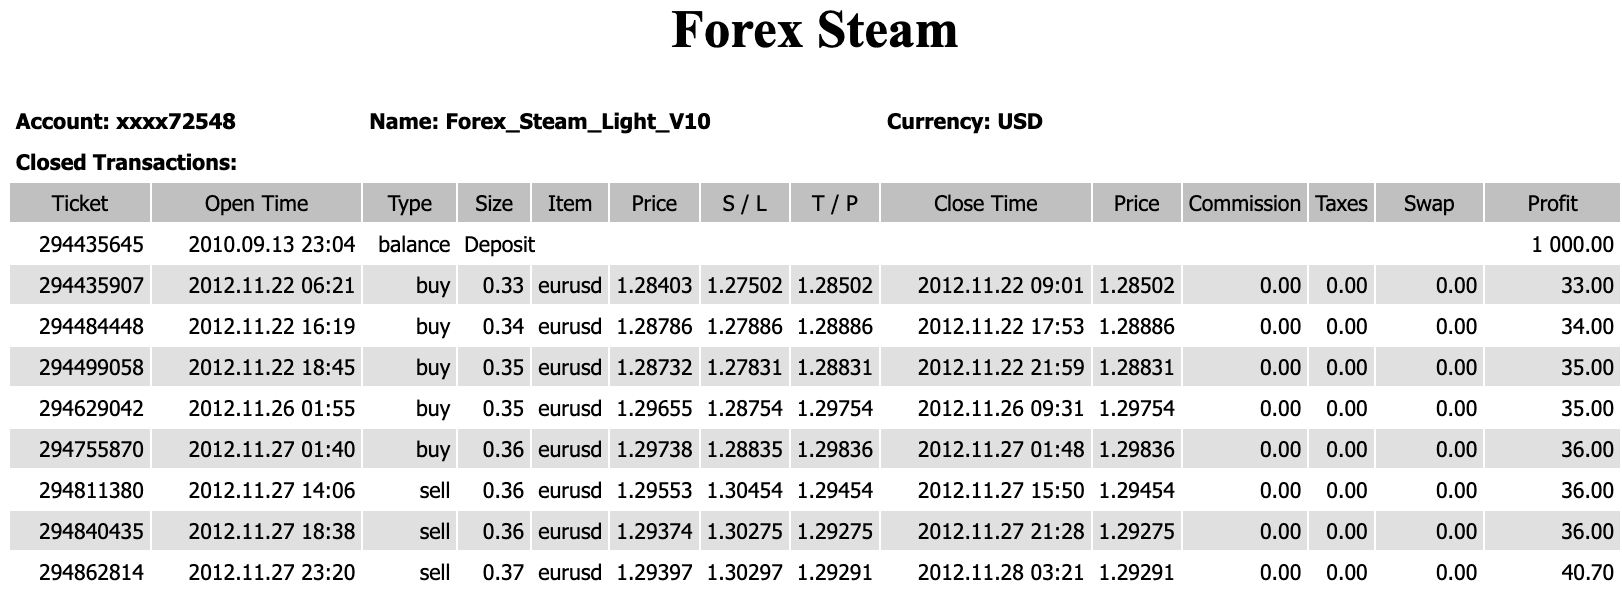 Forex Steam trading results